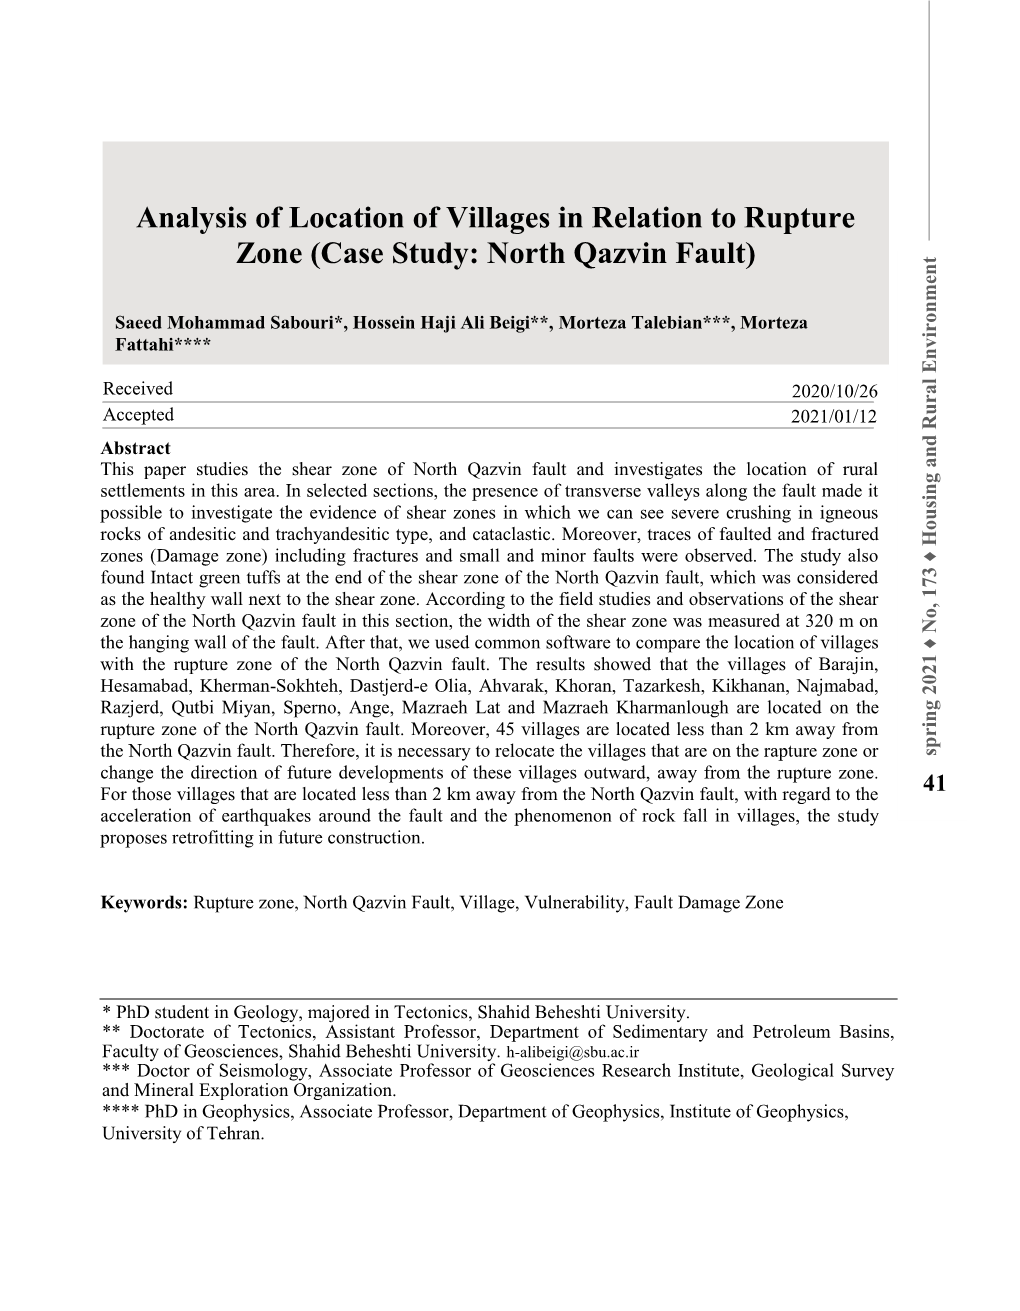 Analysis of Location of Villages in Relation to Rupture Zone (Case Study: North Qazvin Fault)